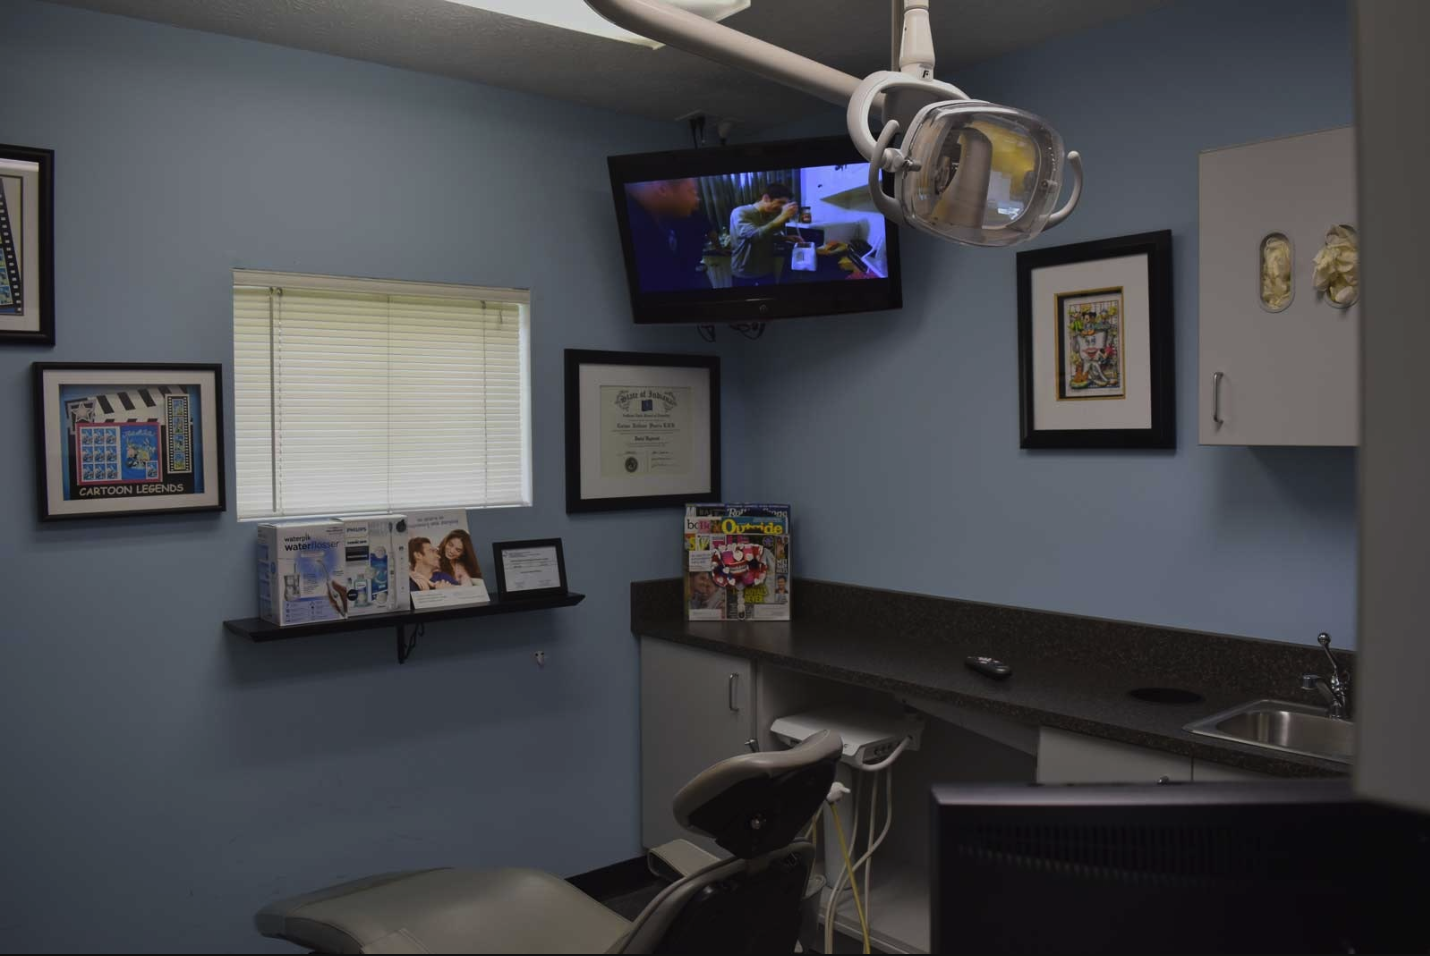 Lande Cosmetic, Implant, and Family Dentistry | Carmel, IN